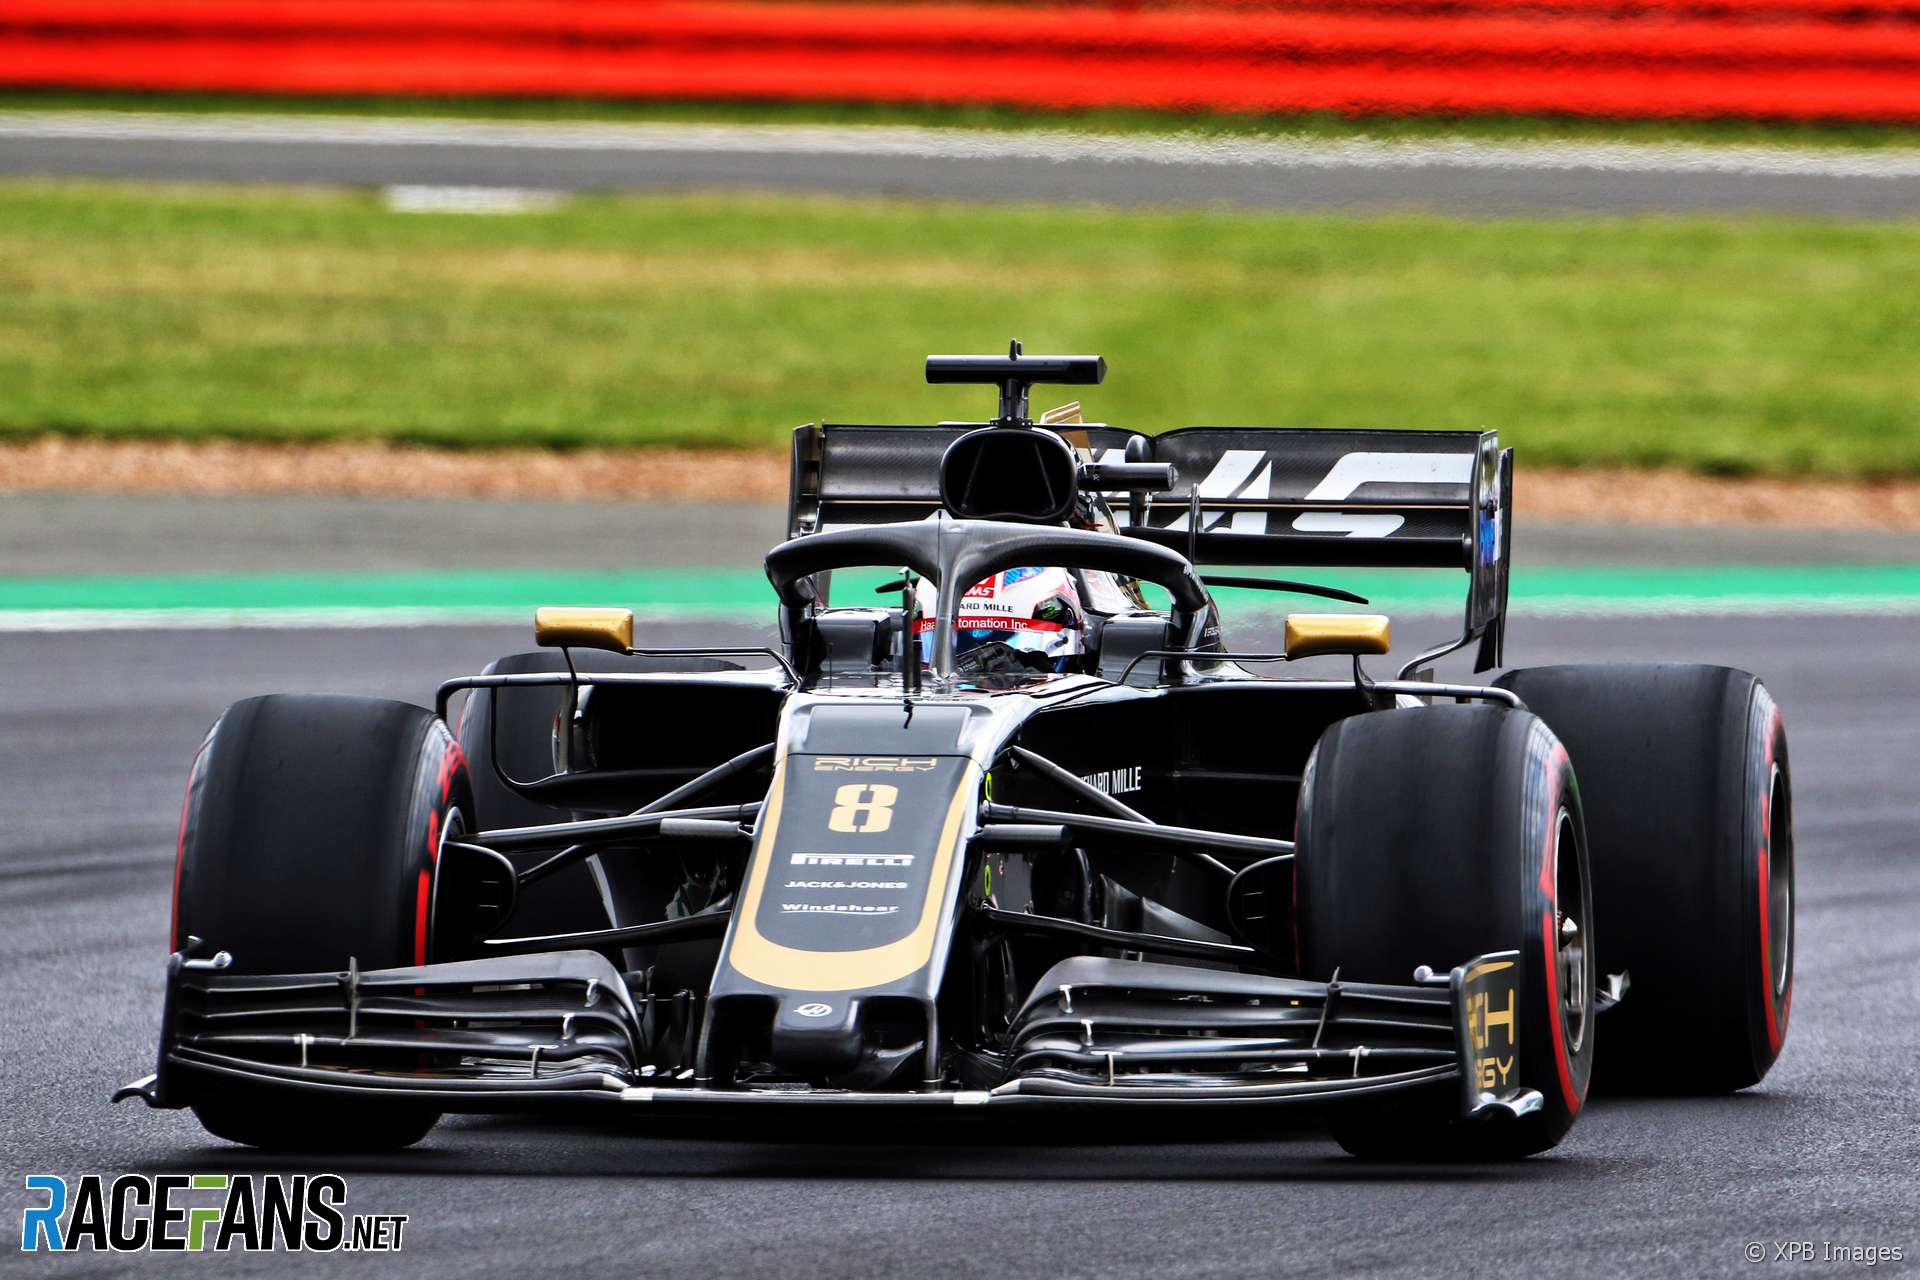 Grosjean says Haas’s old aero feels much better after beating Magnussen’s new-spec car